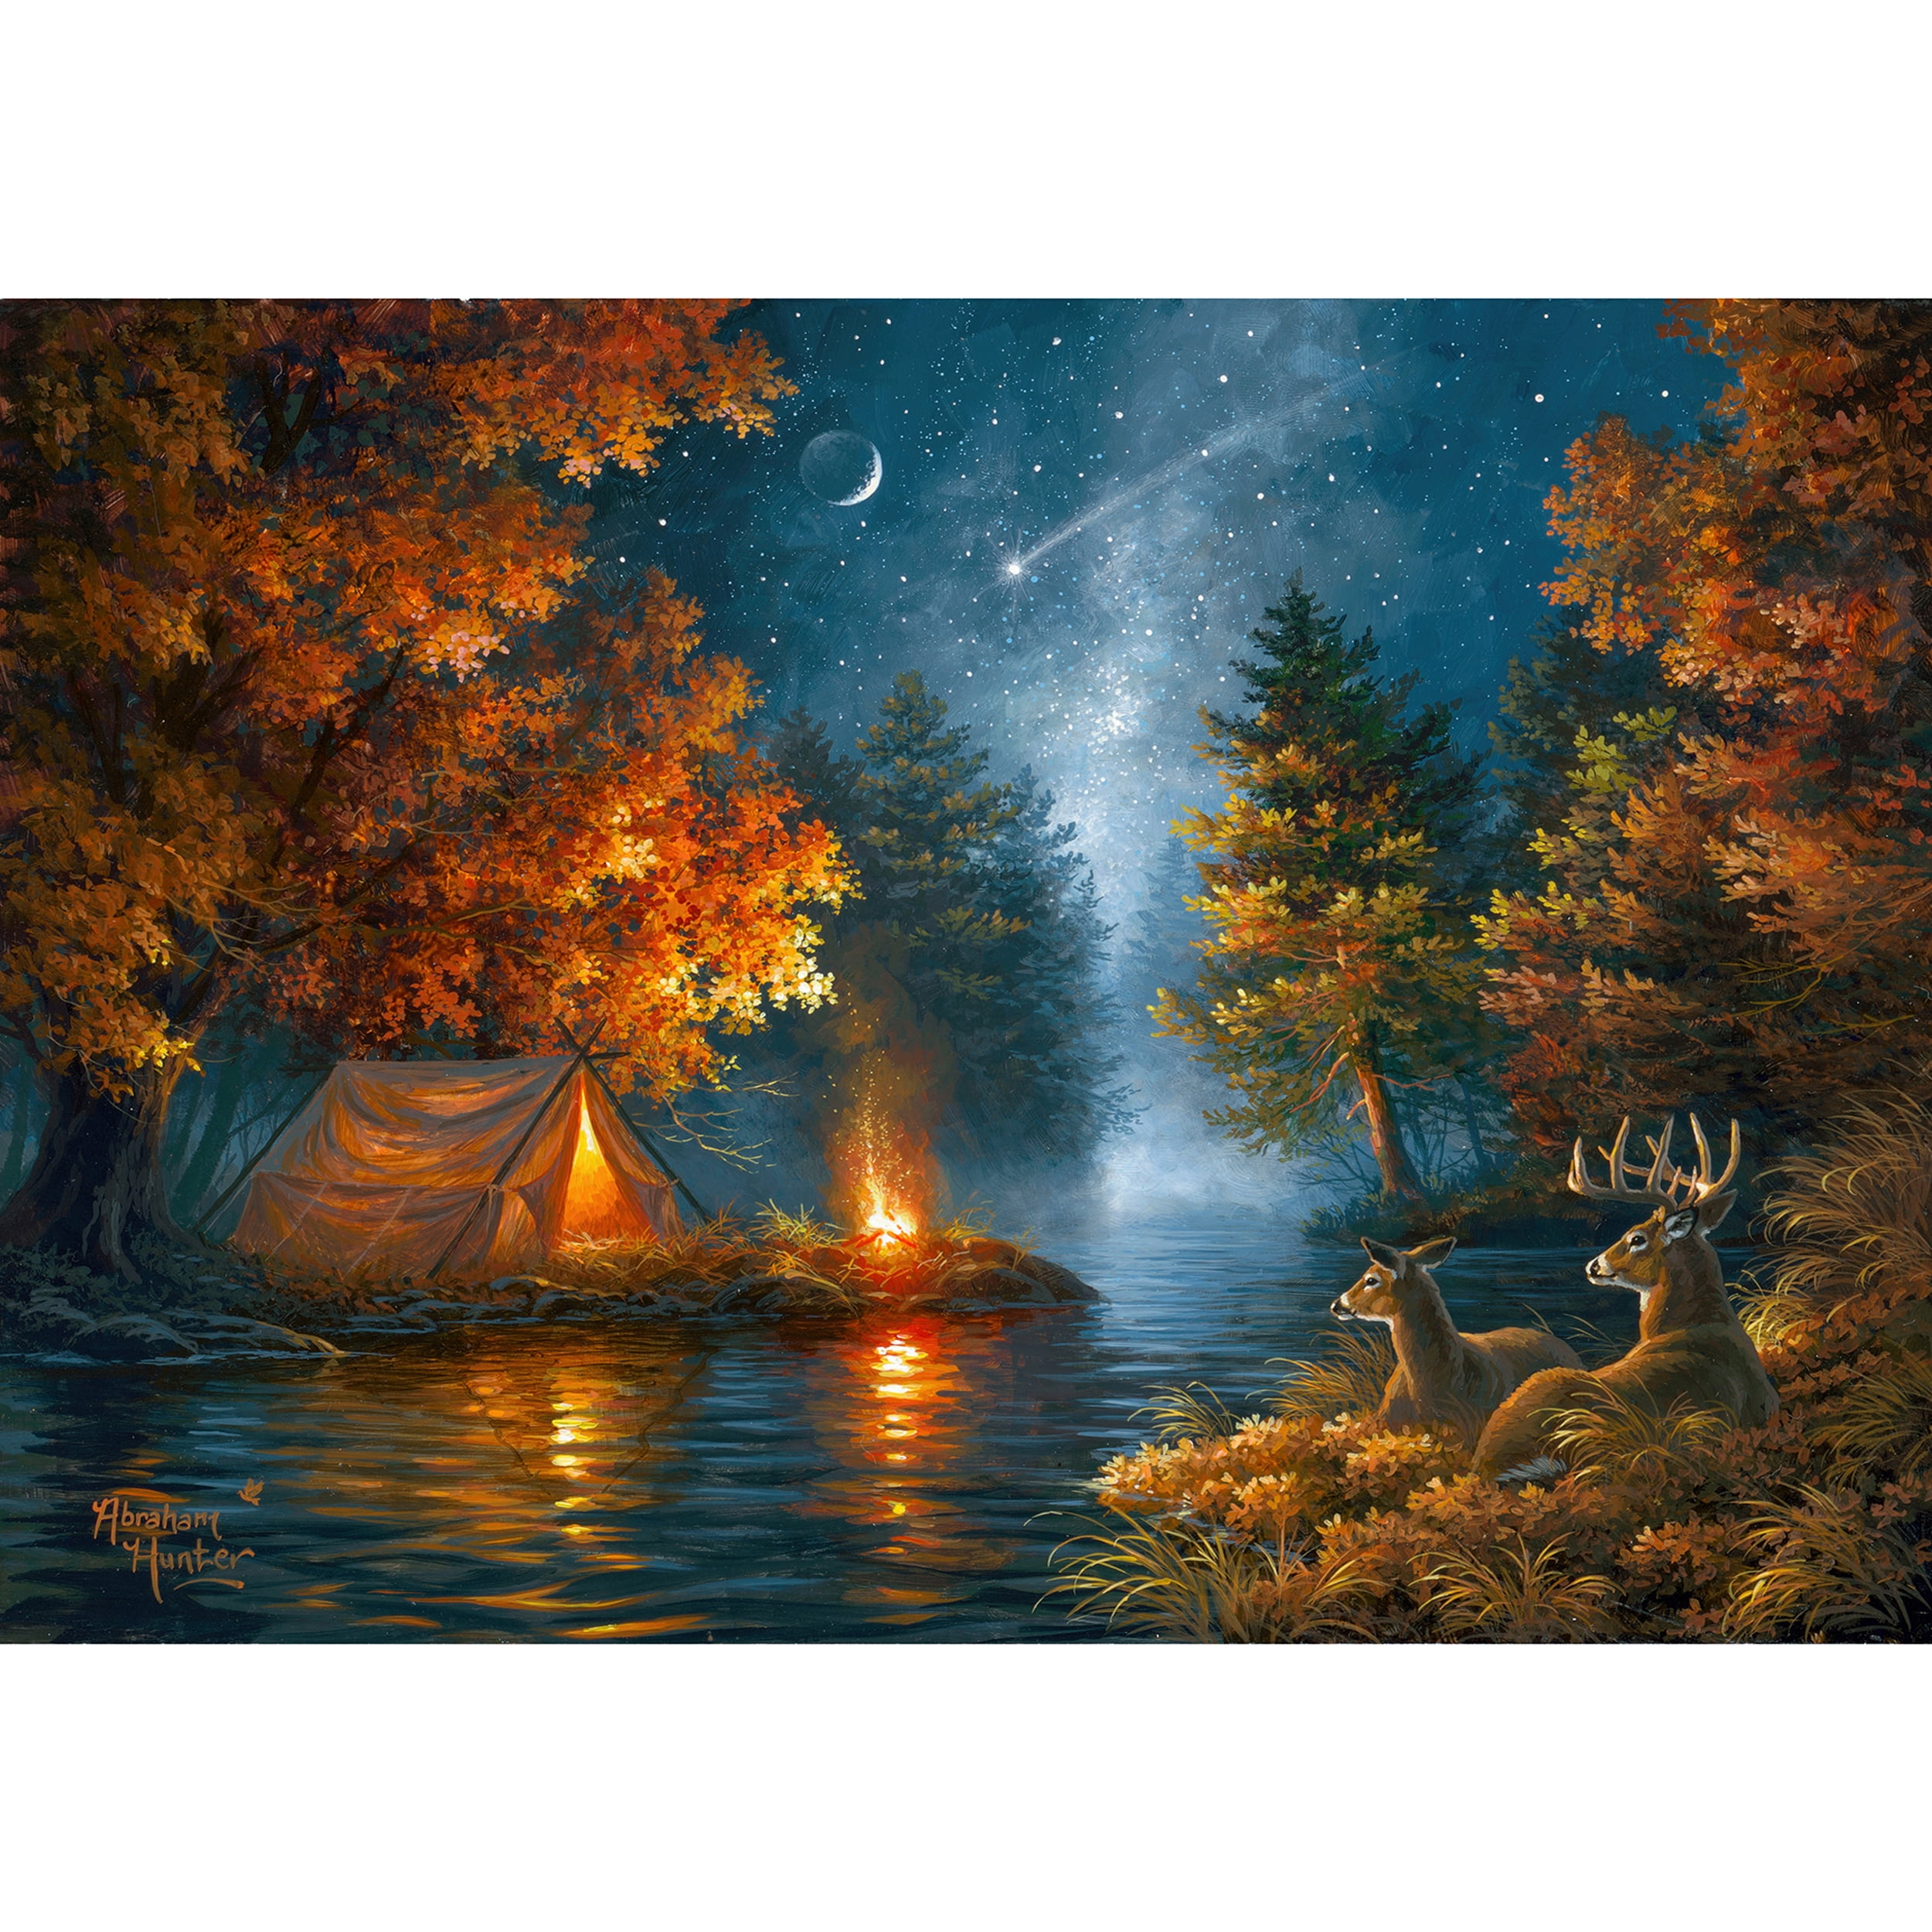 River's Edge Products LED Canvas Wall Art, 24 by 16 Inches, Fiber Optic  Light Up Wall Decor, Battery Operated Lighted Canvas Print, LED Light  Kitchen, Bedroom, or Home Decor, Wishing Upon A